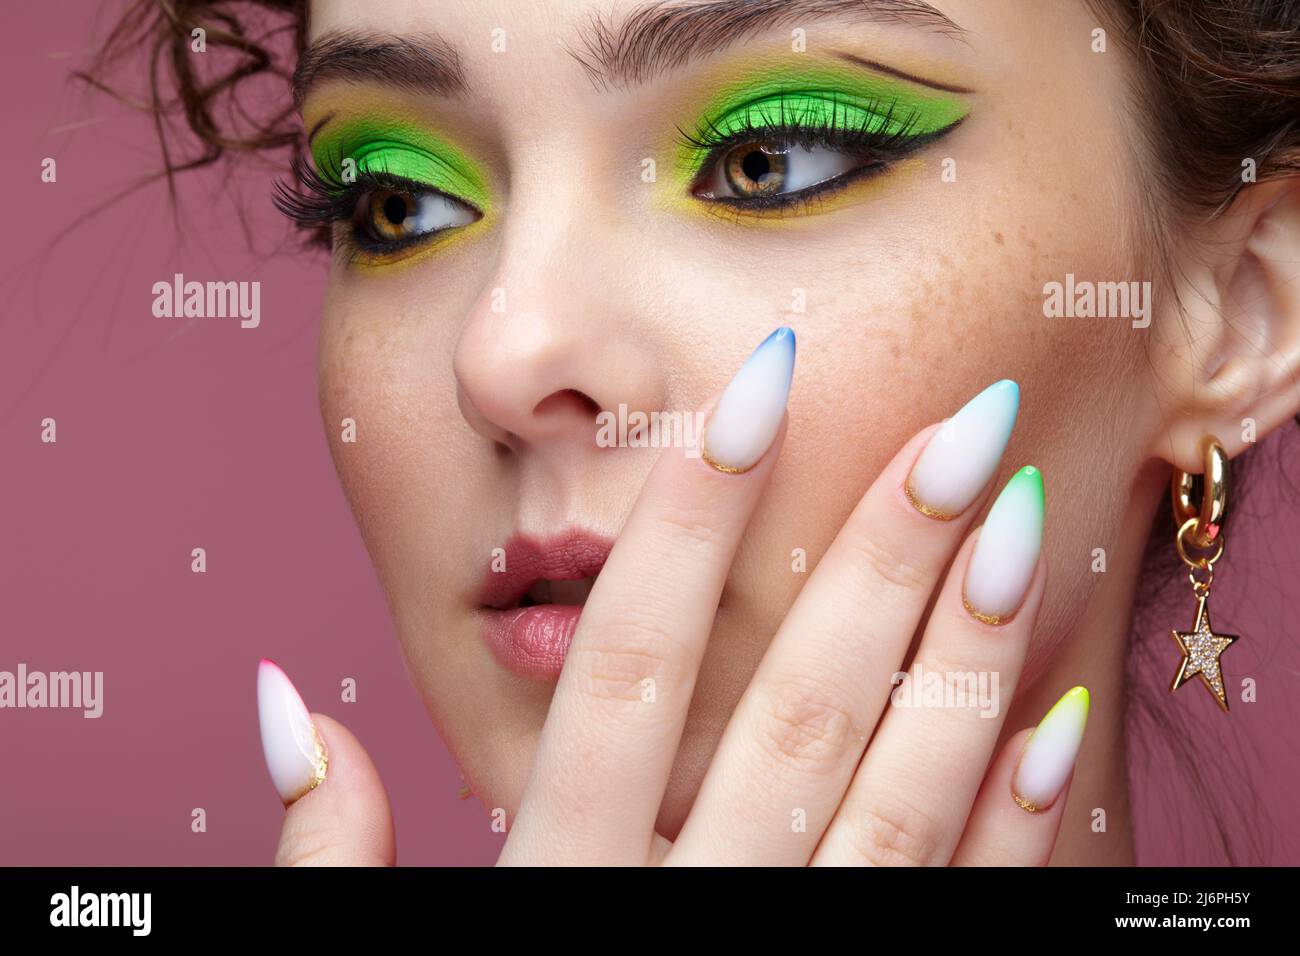 Portrait of young woman with hand near face. Female with unusual green eyes shadows makeup. Girl with nails with multi-colored manicure. Stock Photo